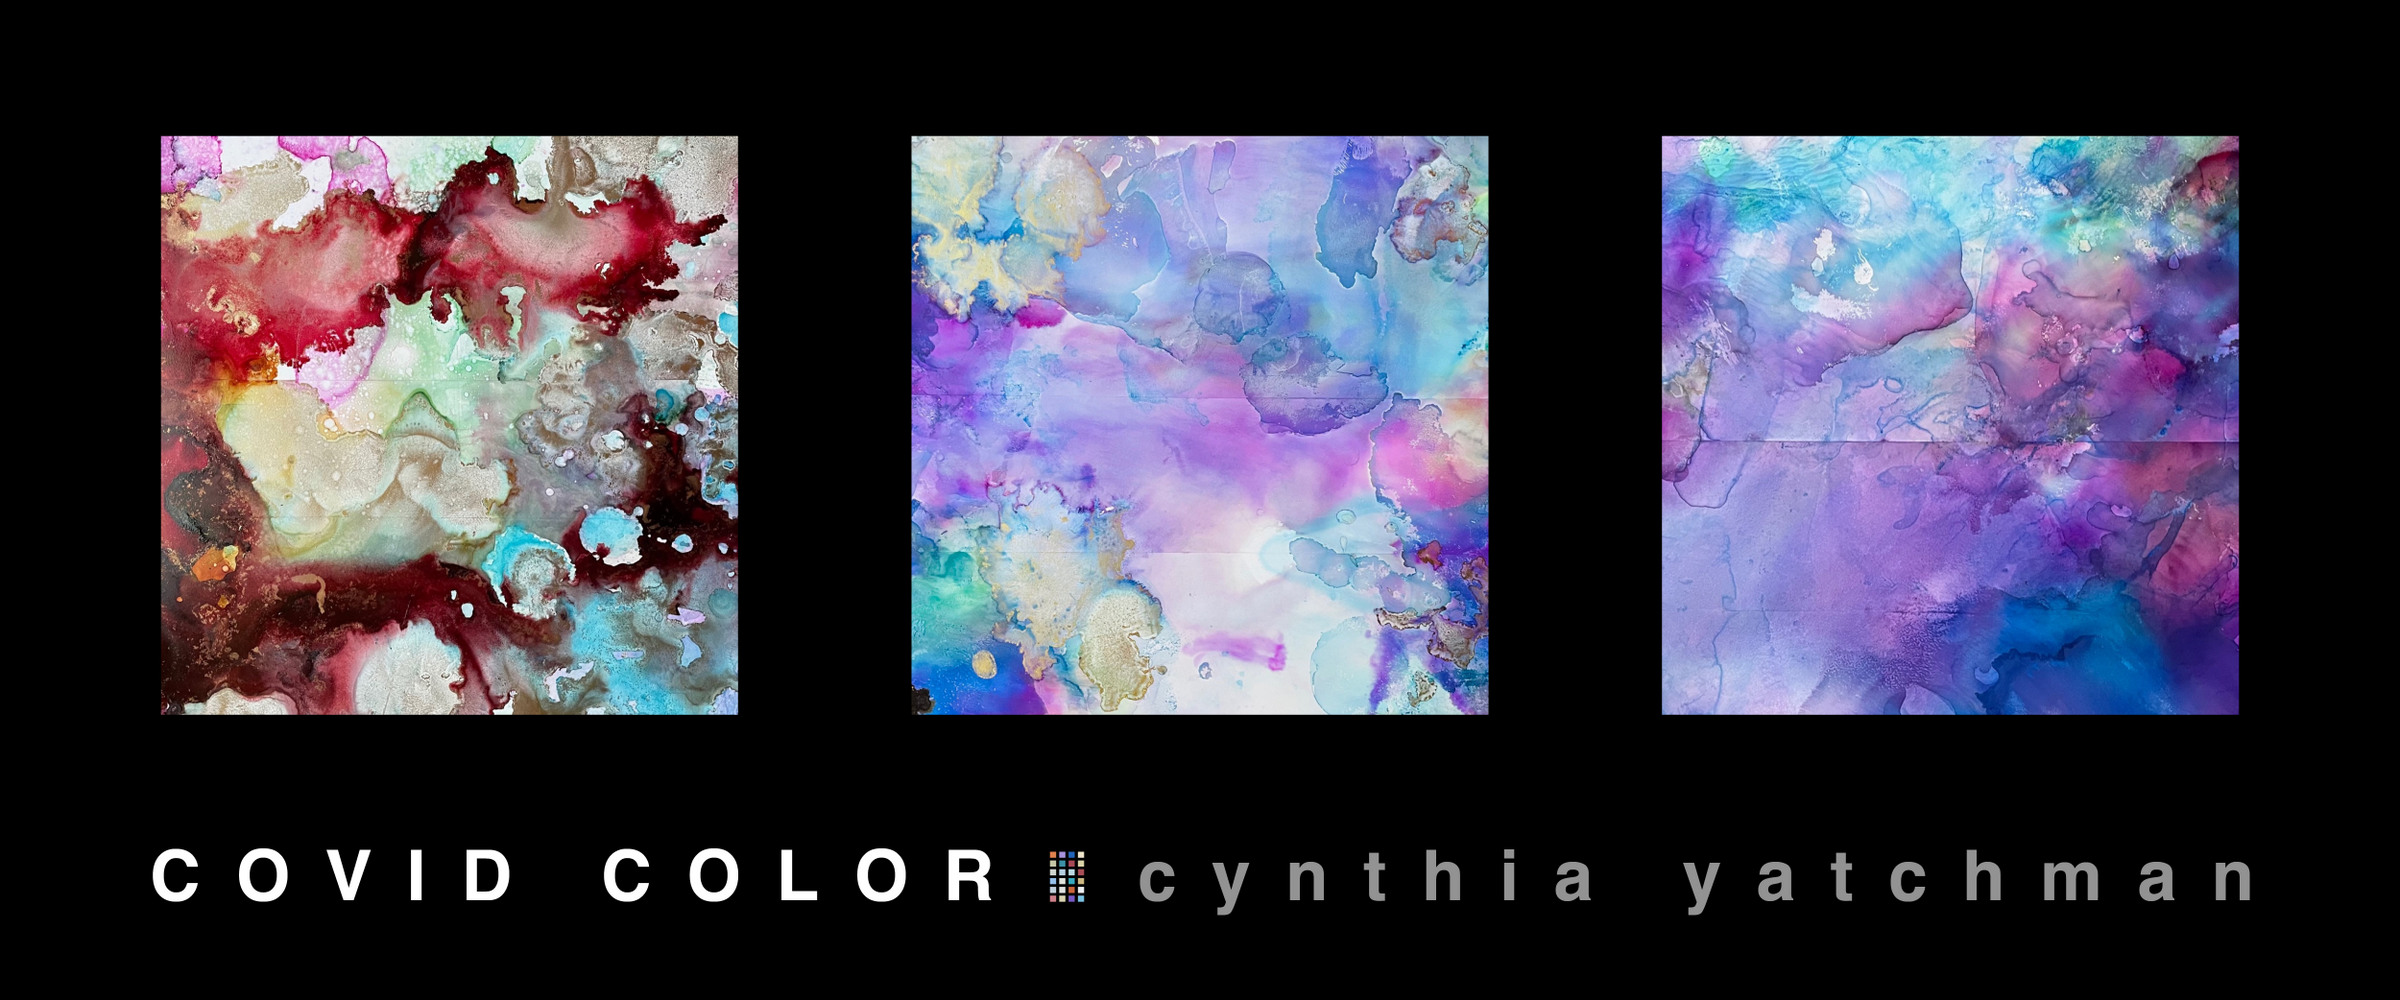 Abstract images and text: Covid Color by Cynthia Yatchman